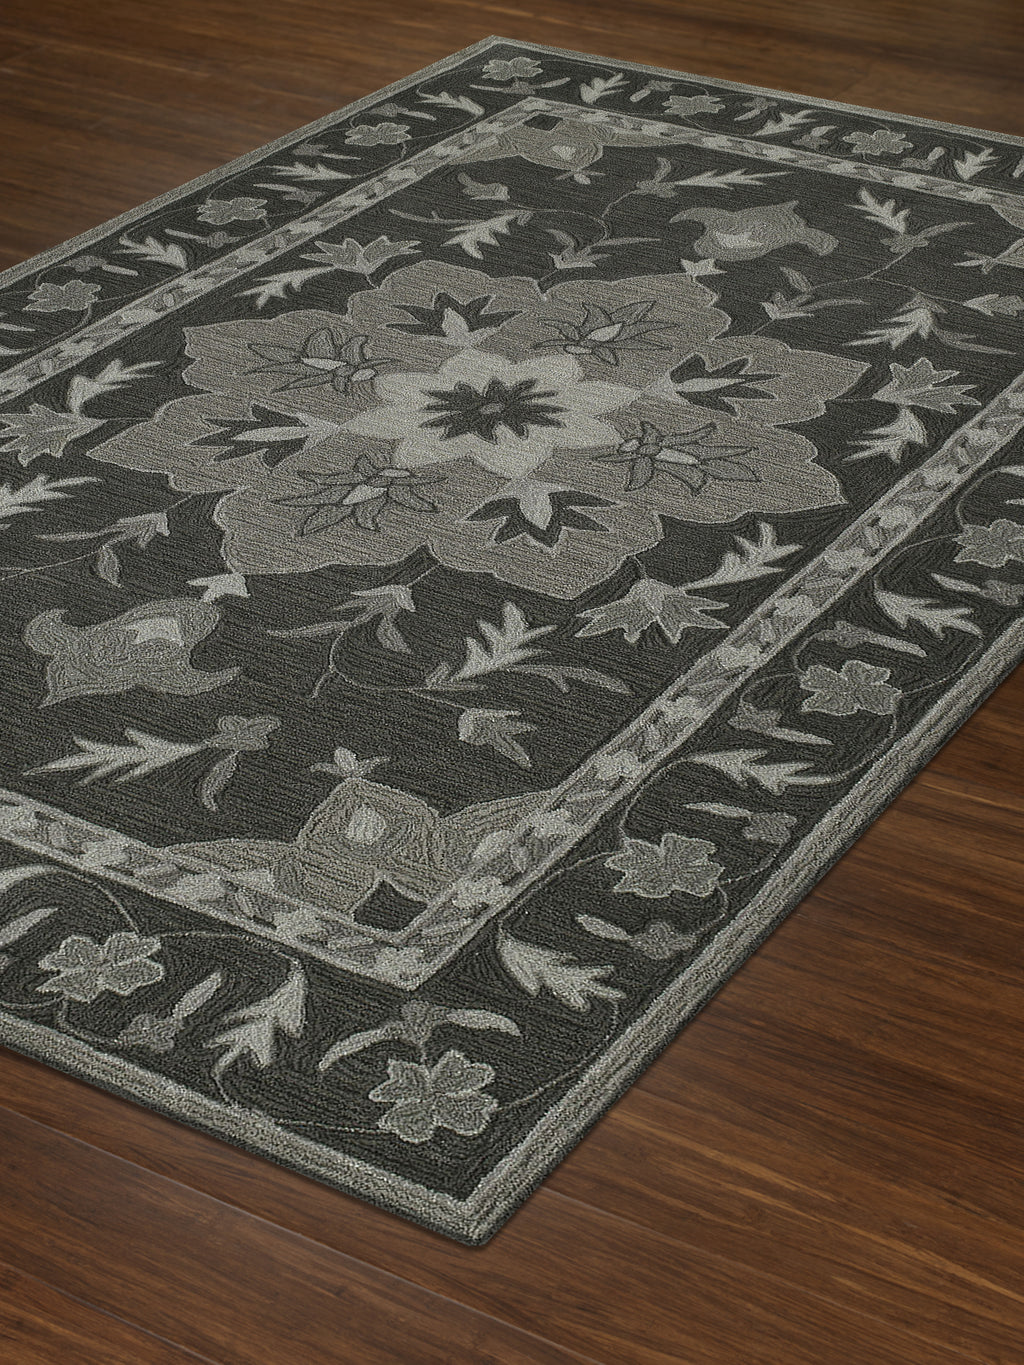 Dalyn Tribeca TB4 Charcoal Area Rug Floor Image Feature